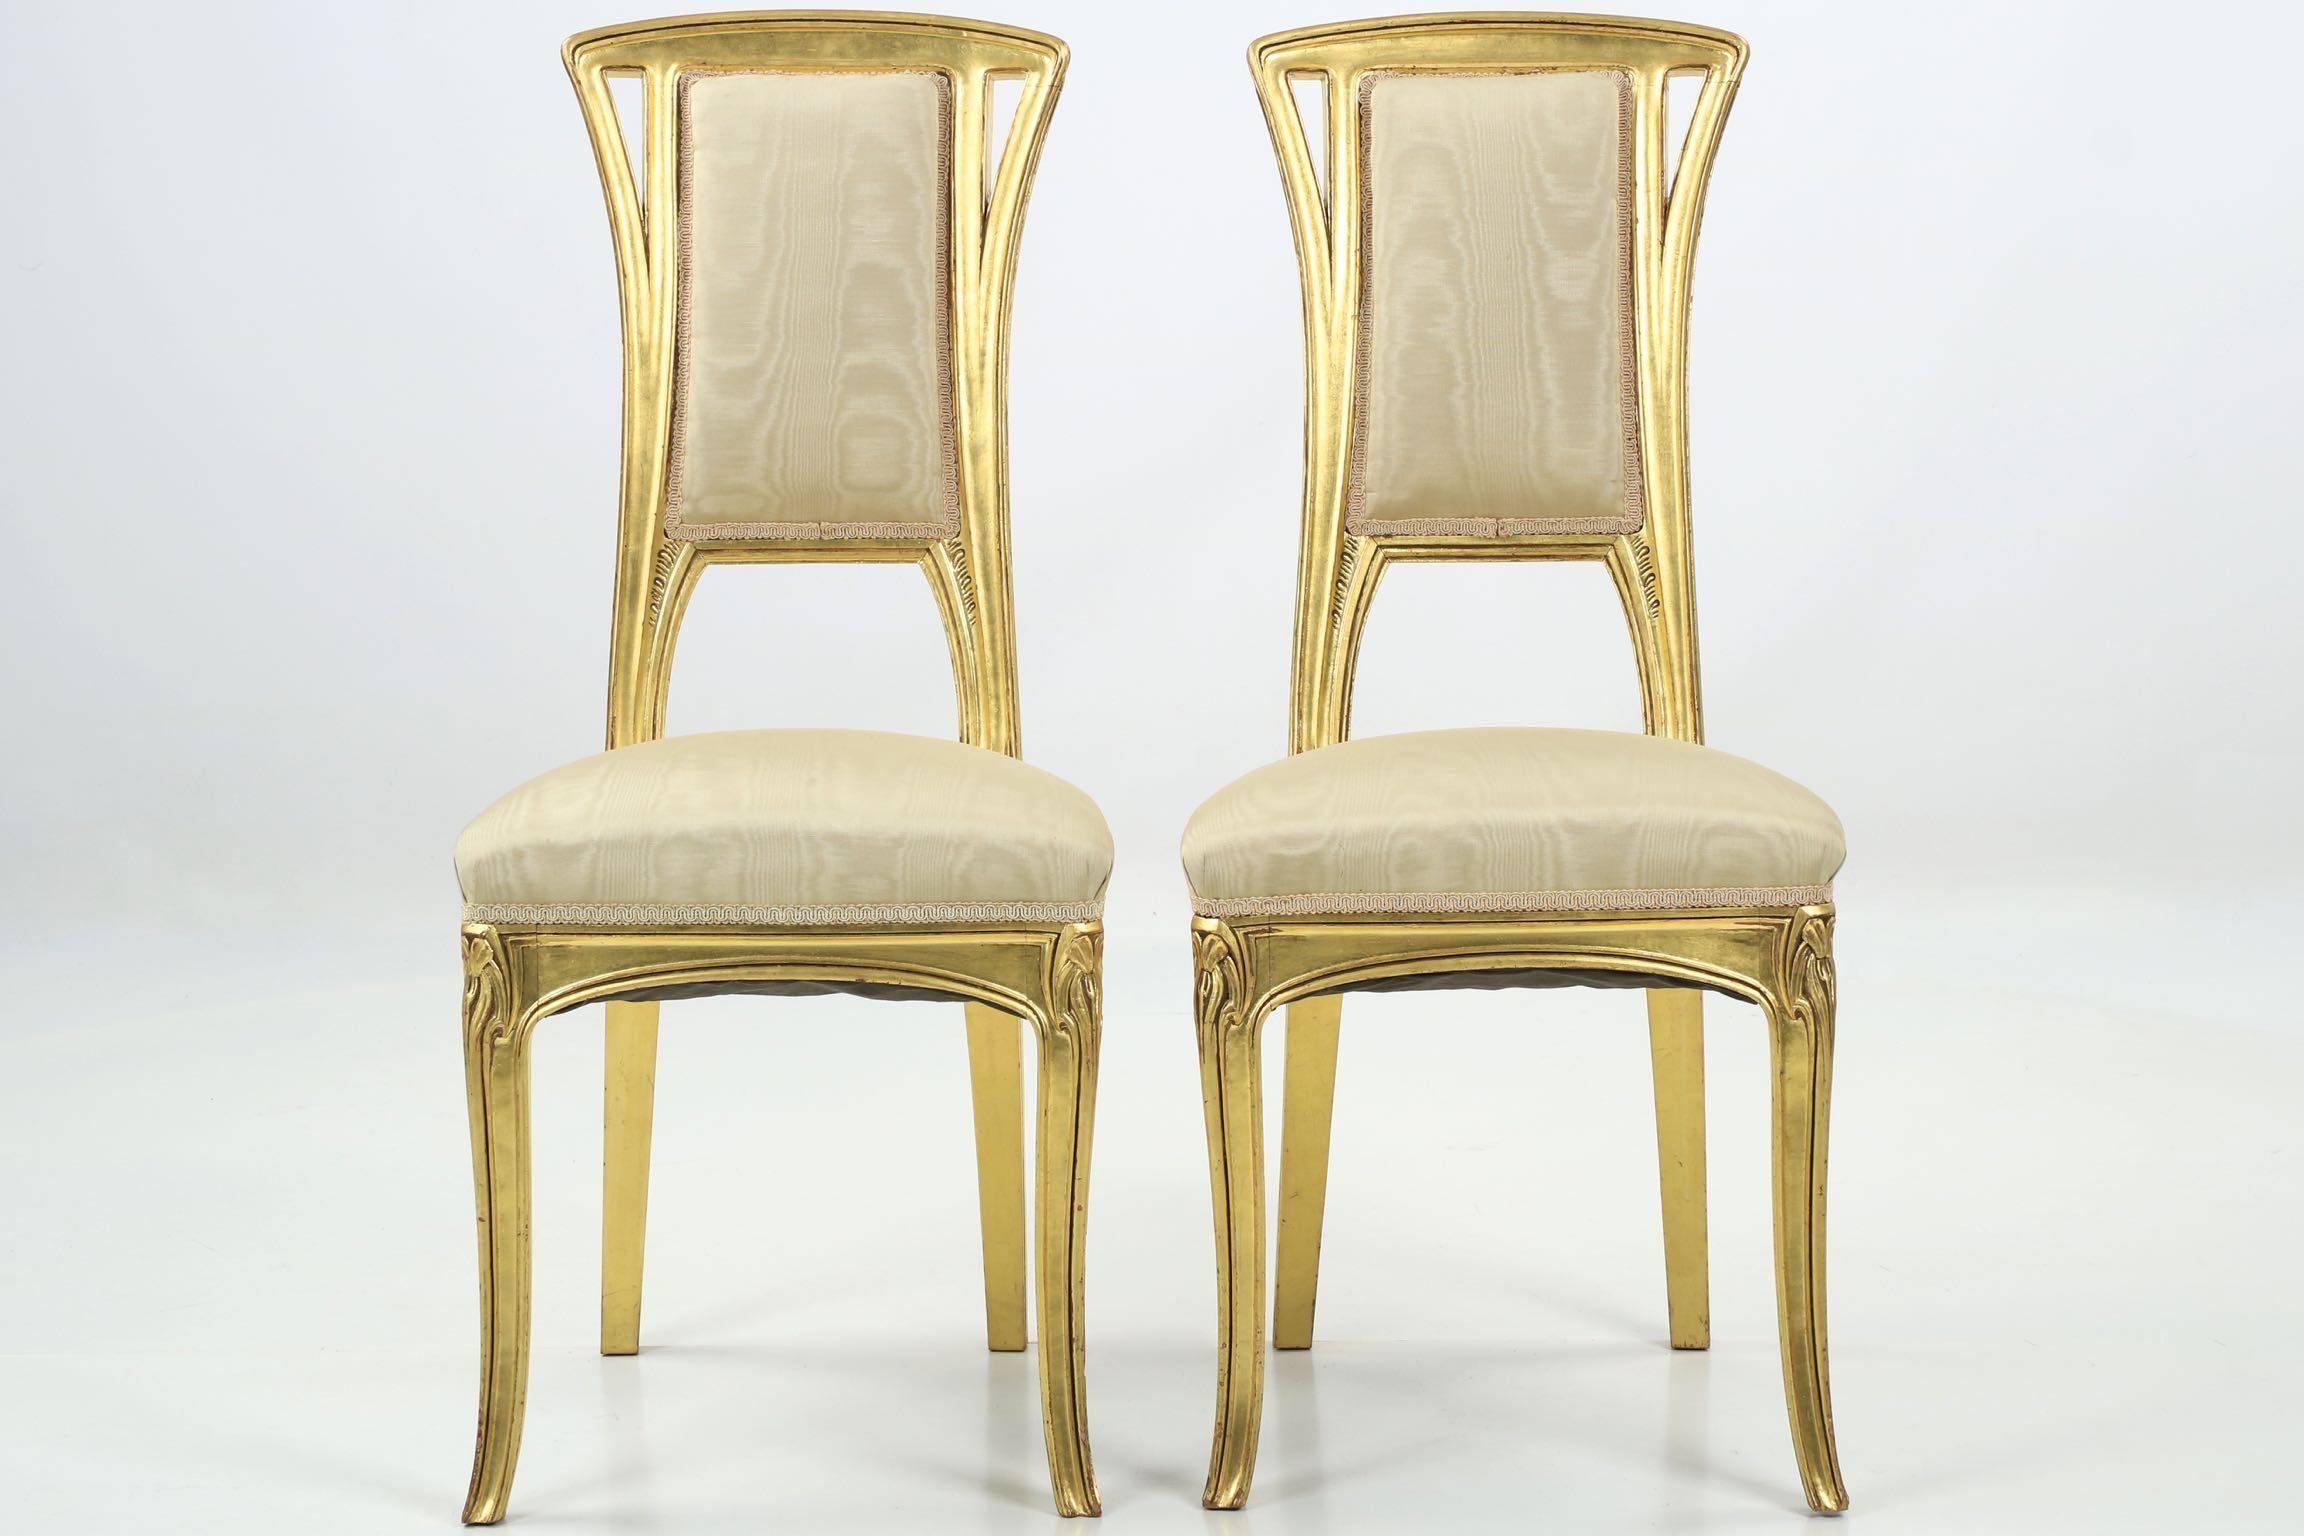 A perfectly designed and proportioned pair of giltwood side chairs that own the essence of the organic Art Nouveau form, they exhibit precise and gorgeous craftsmanship throughout their remarkably heavy frames. The design is loosely inspired by the